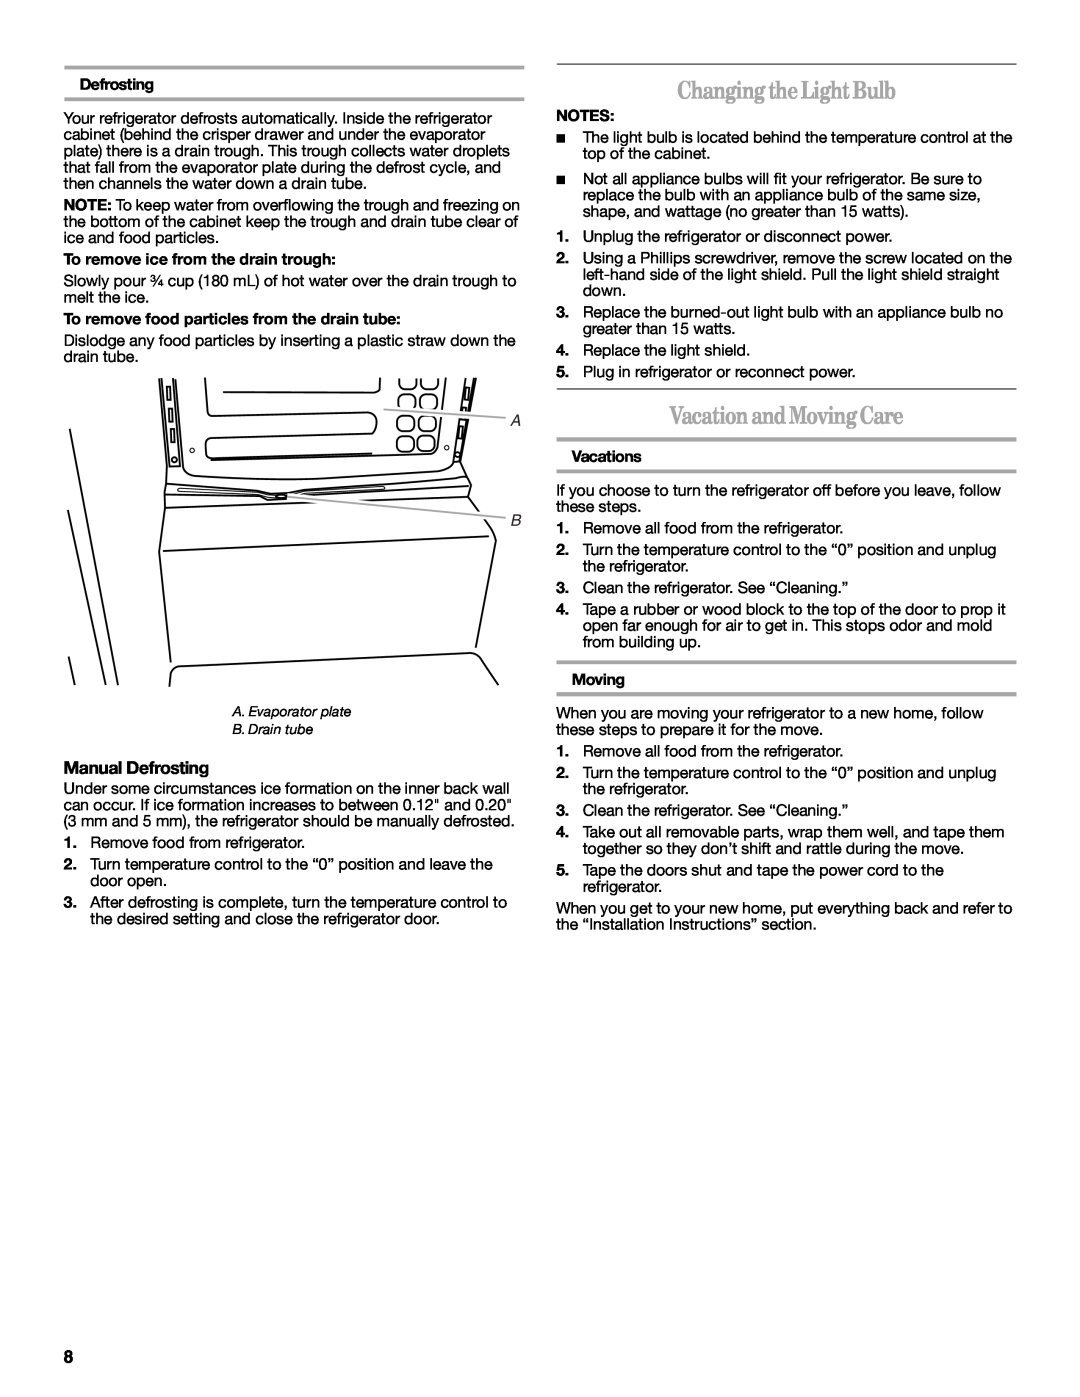 Whirlpool WAR488BSL manual Changing the Light Bulb, Vacationand Moving Care, Manual Defrosting, Vacations 